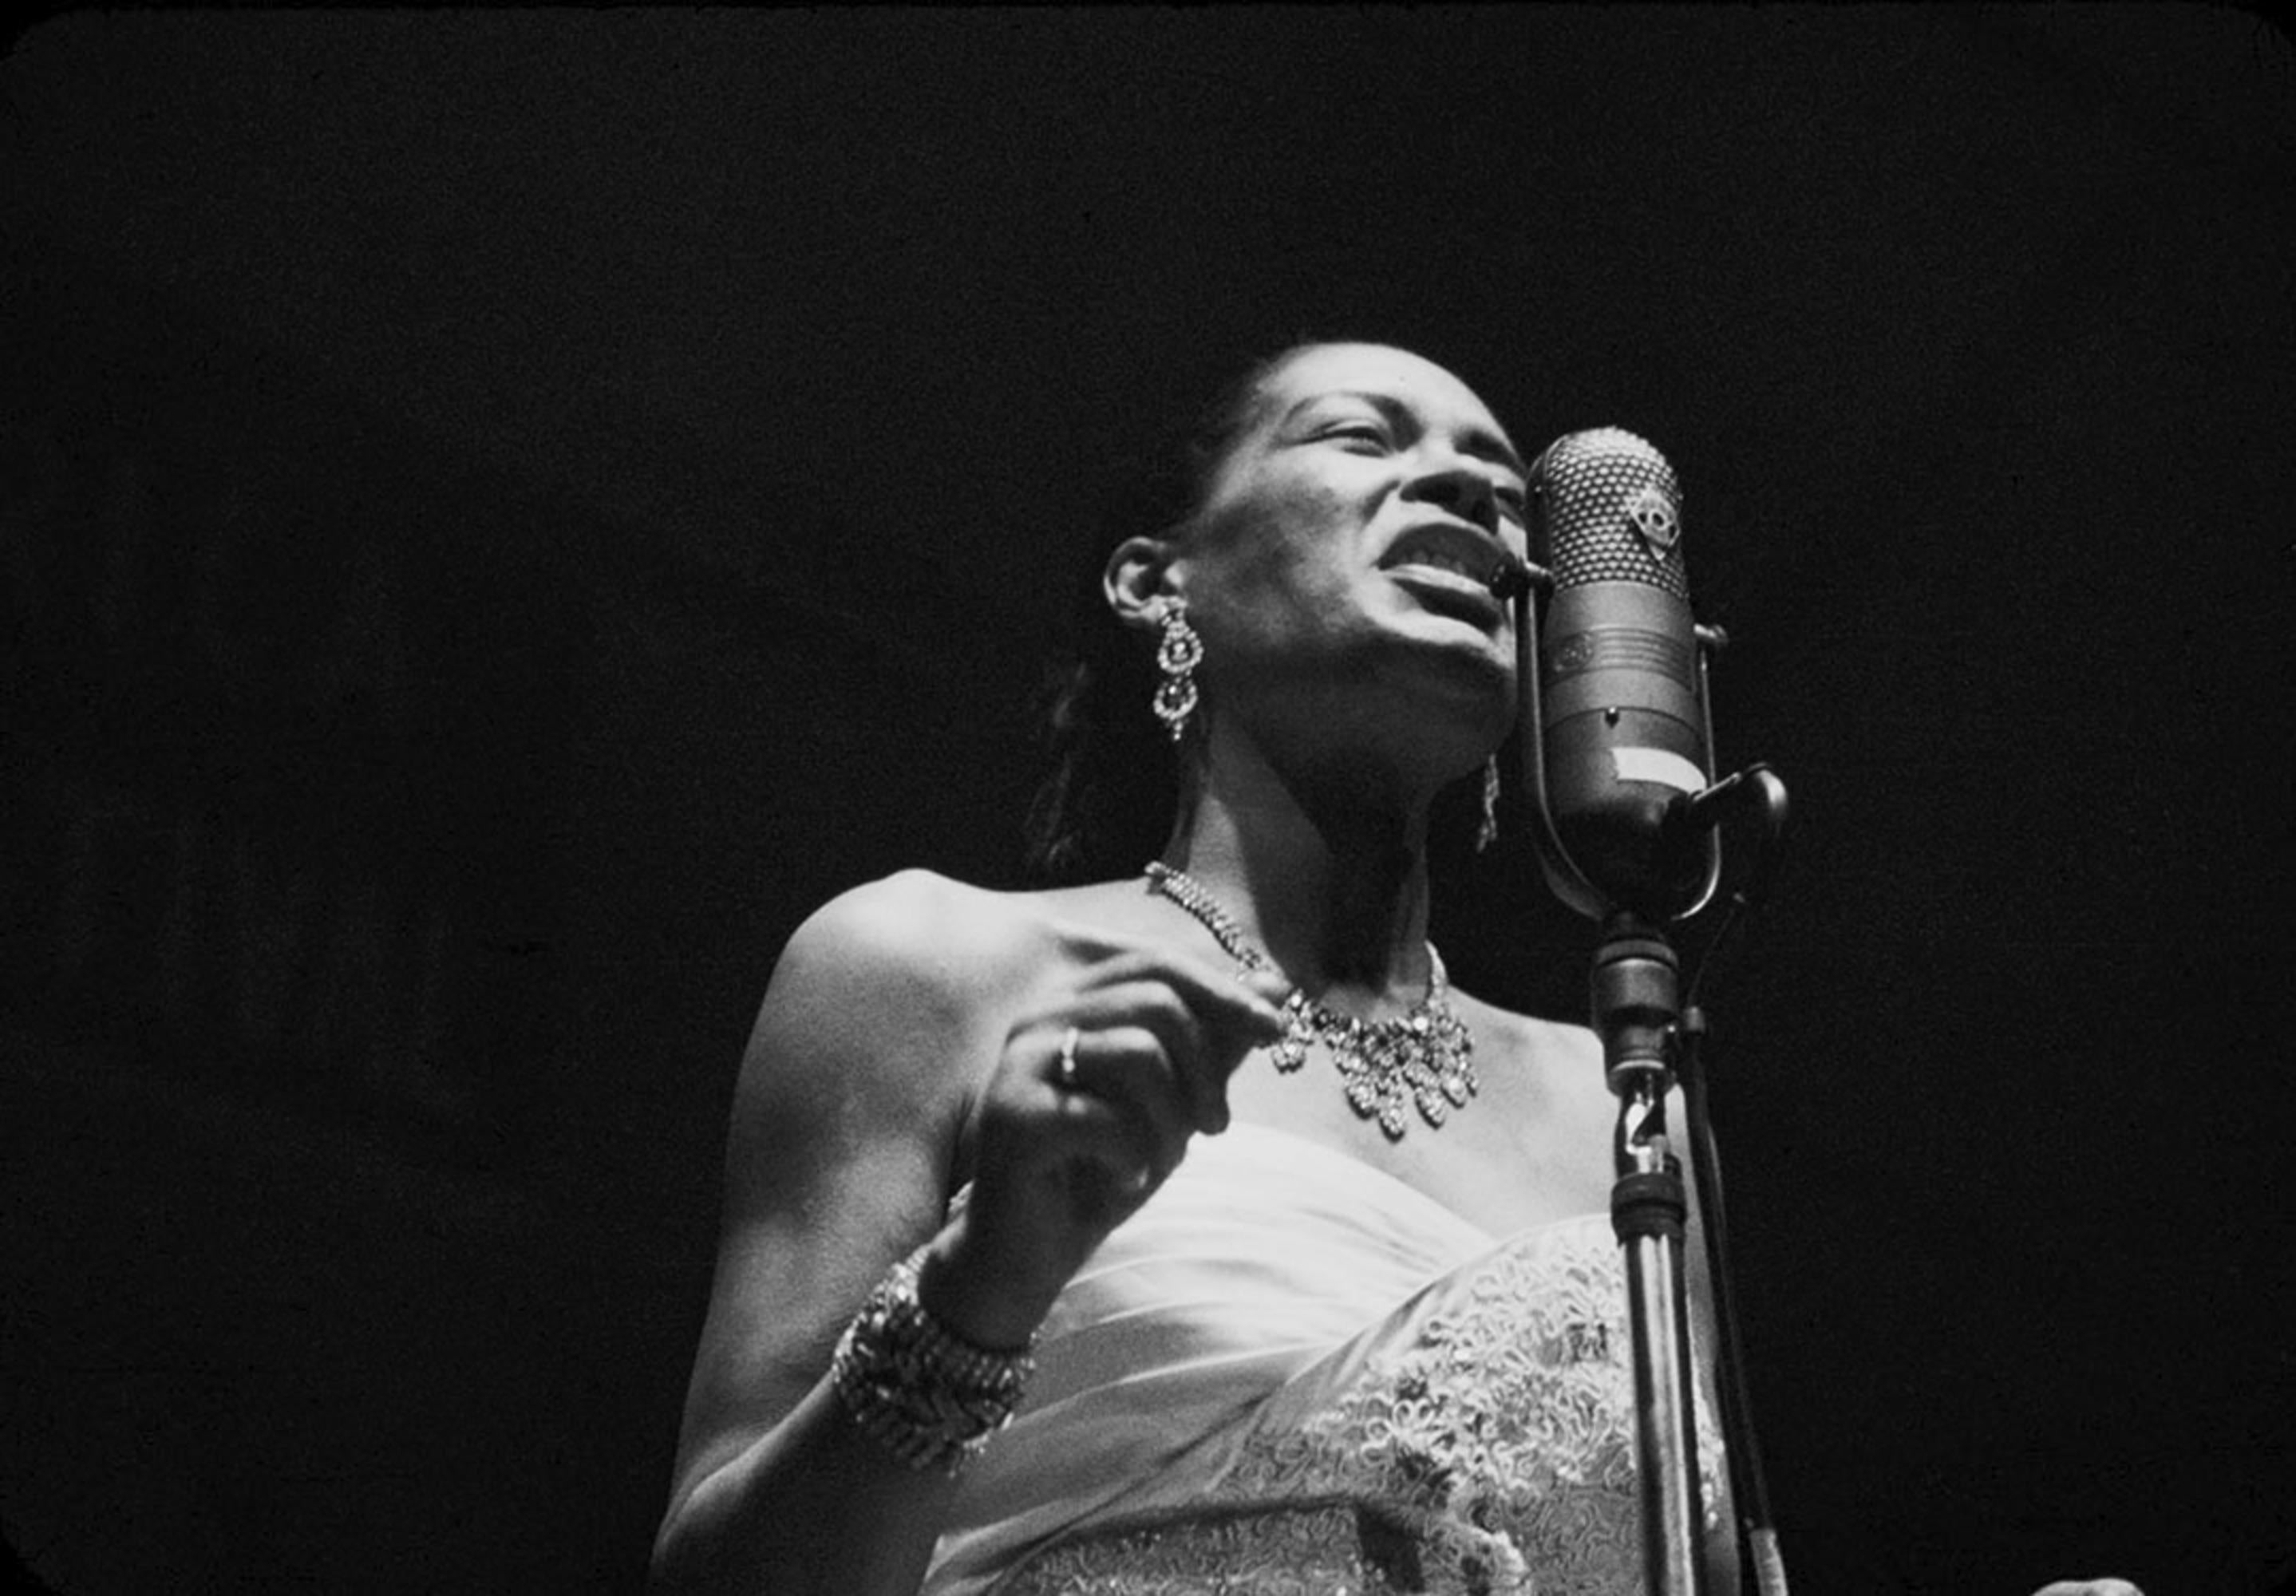 Estate-stamped, gelatin-print silver

American jazz musician and singer-songwriter Eleanora Fagan, professionally known as Billie Holiday, performing on stage.

Available sizes: 
16”x20" Edition of 25
20”x24" Edition of 25
30”x40" Edition of